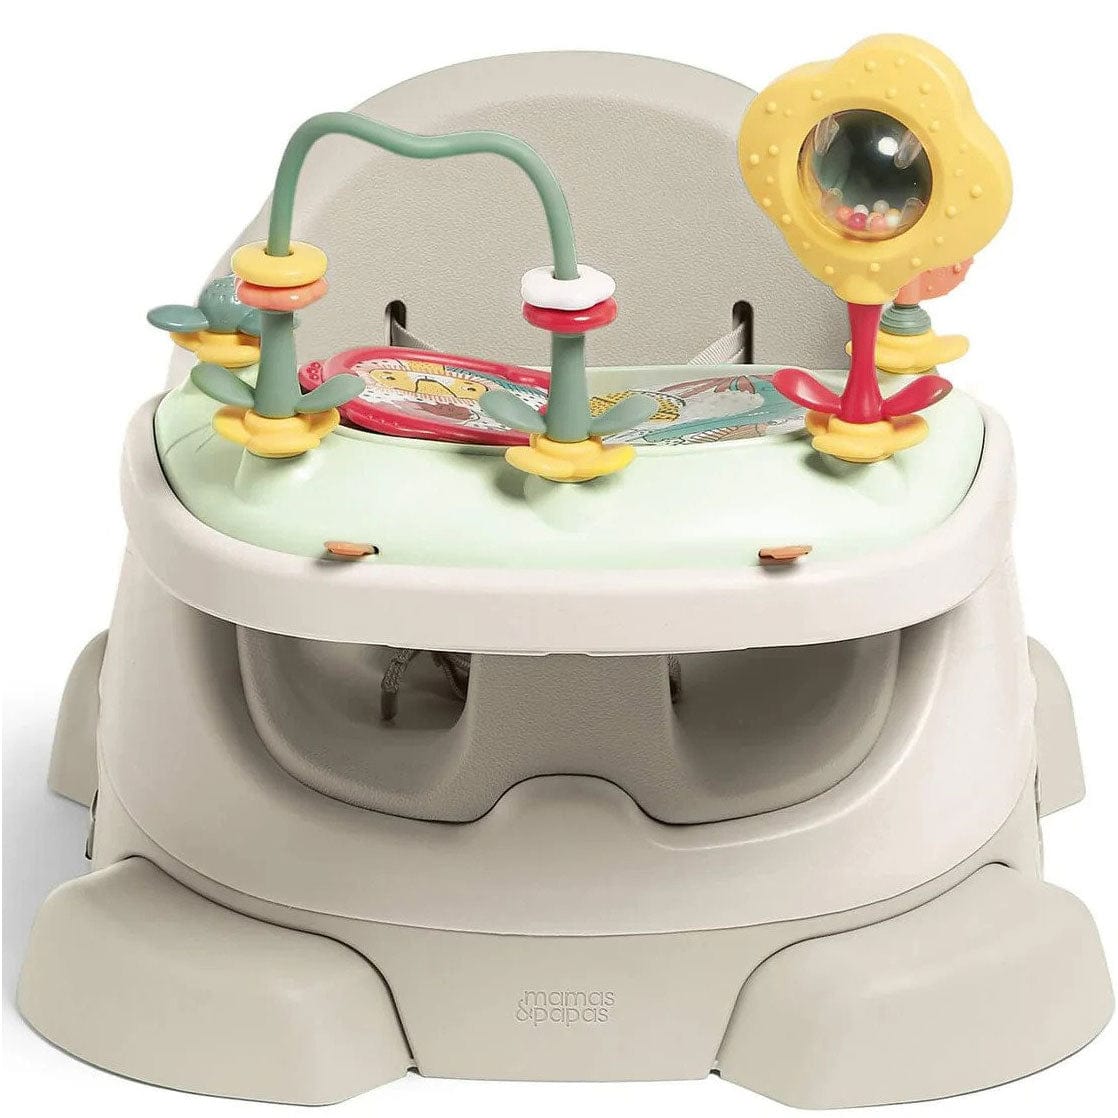 Mamas & Papas Bug 3-in-1 Floor & Booster Seat with Activity Tray in Clay Activity Toys 98681CL00 5063229033285